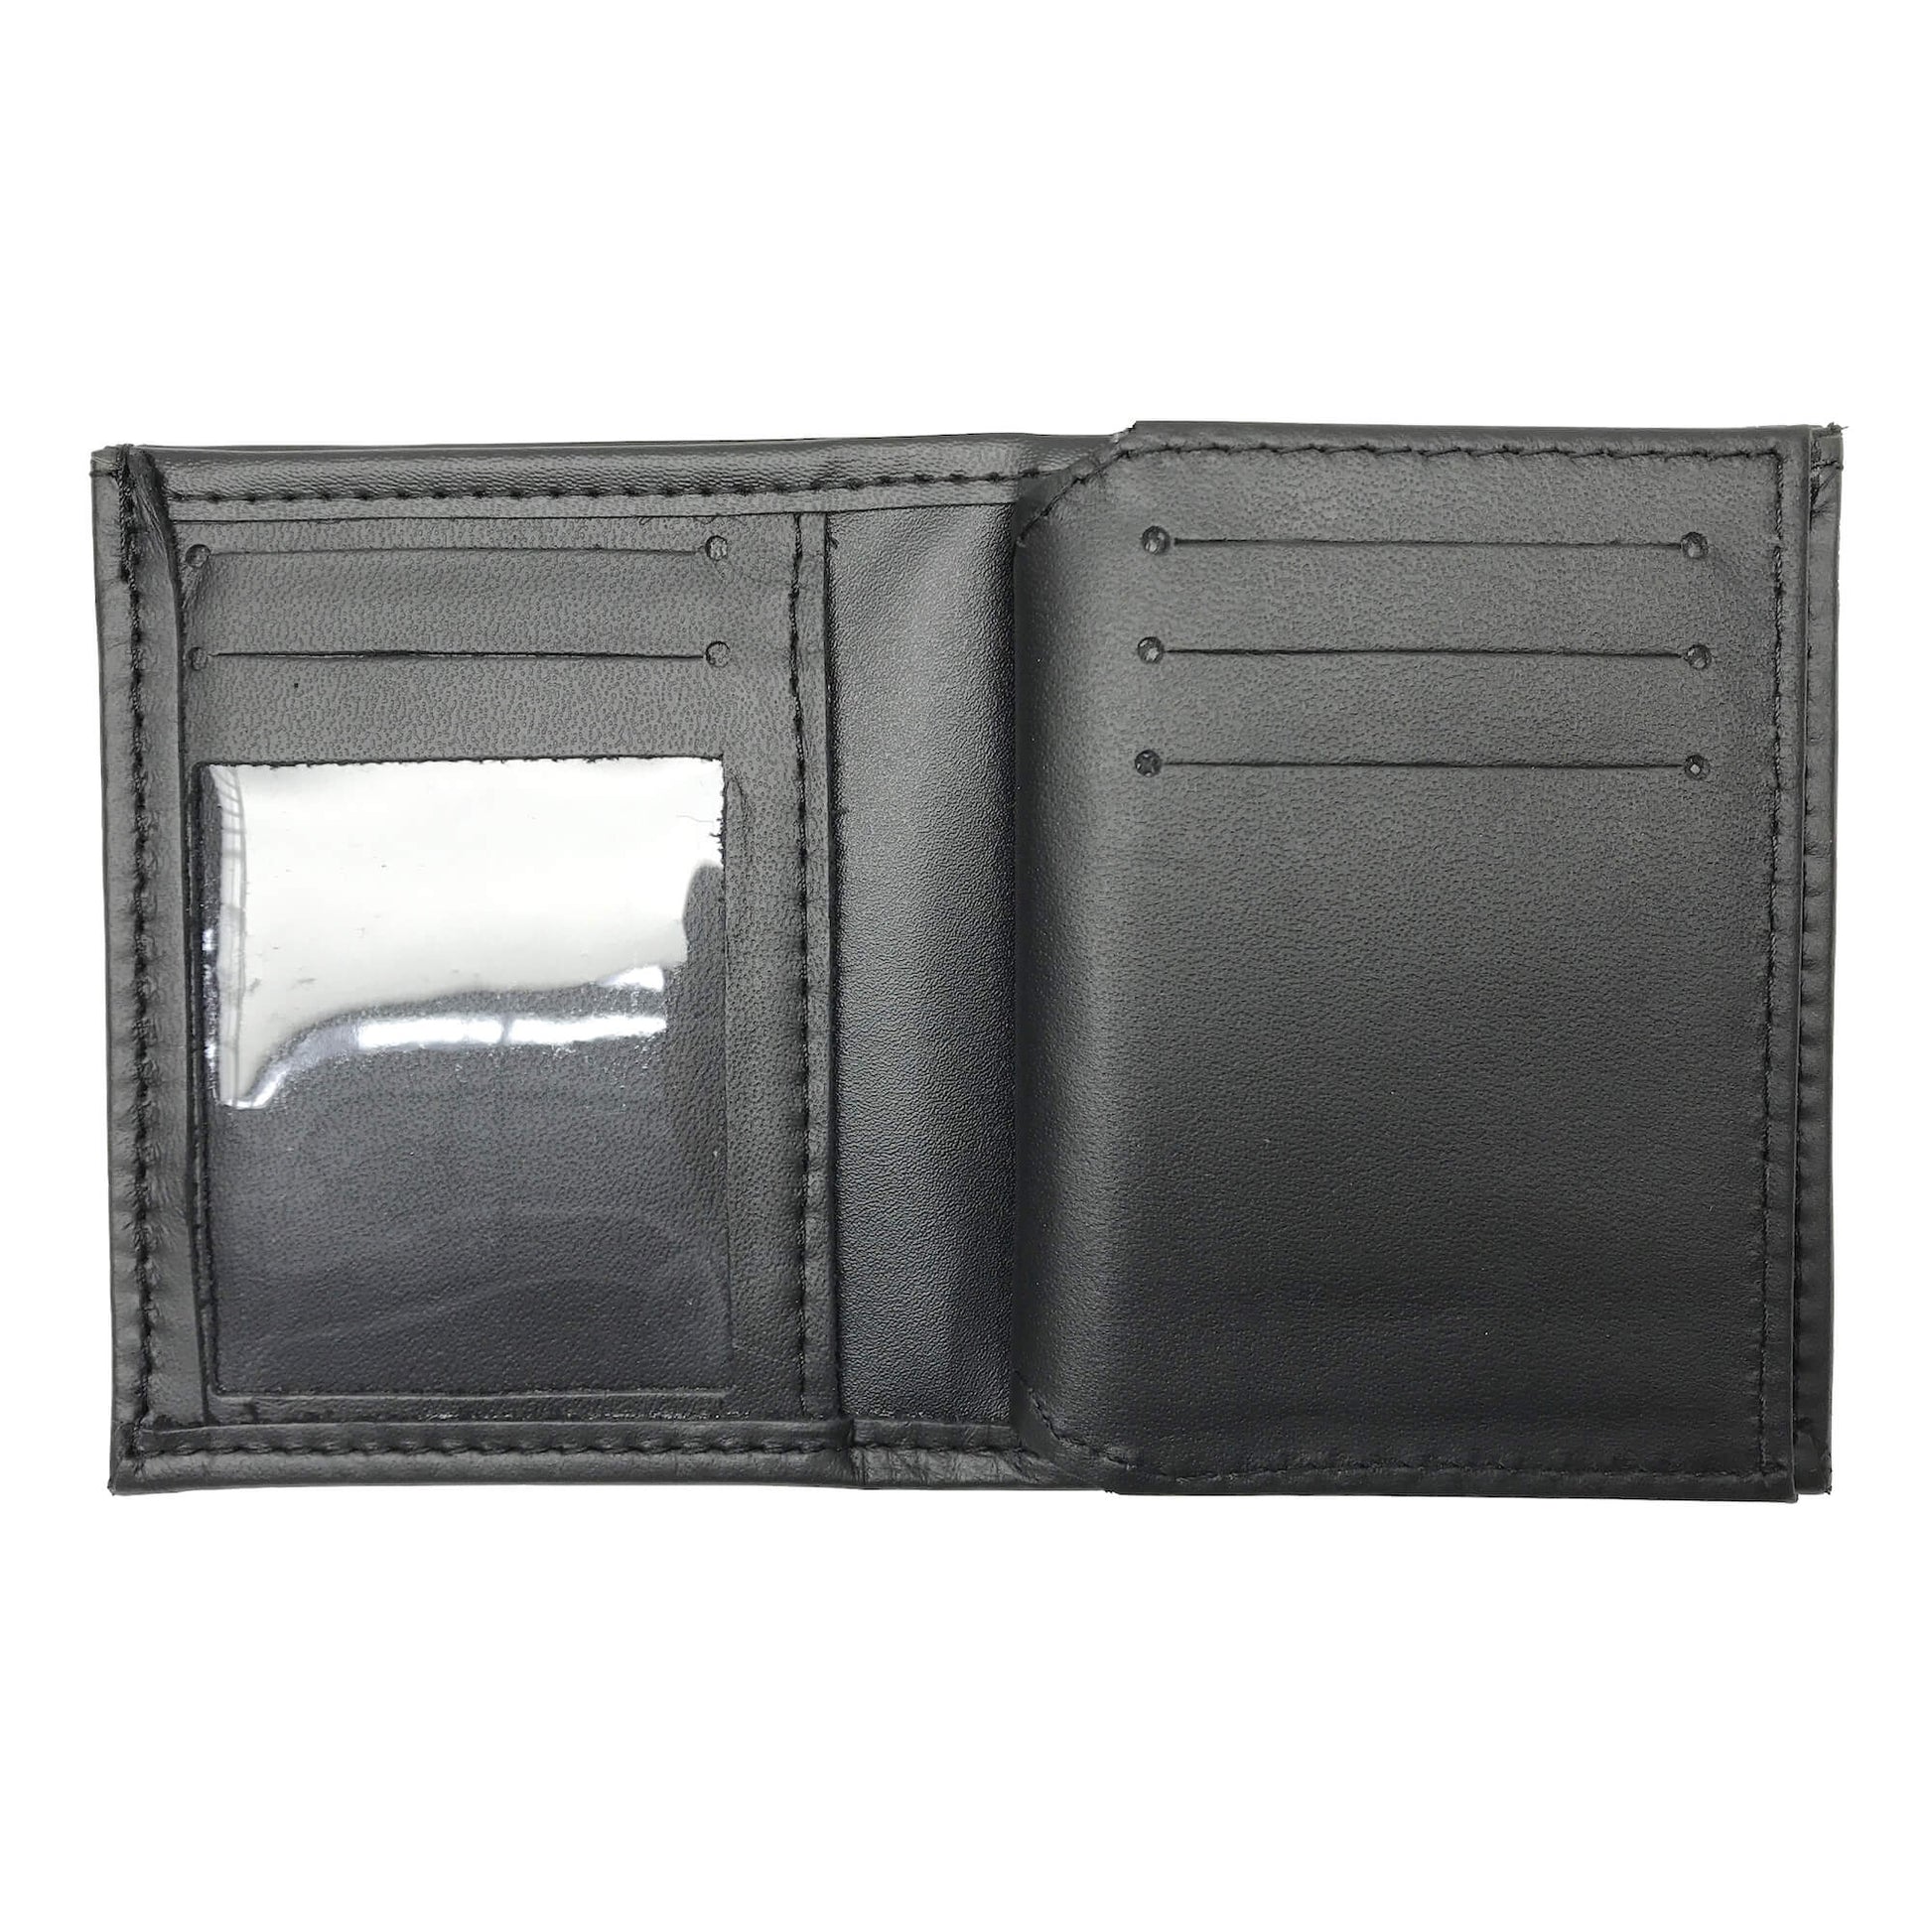 New Jersey Department of Corrections (DOC) Bifold Hidden Badge Wallet-Perfect Fit-911 Duty Gear USA